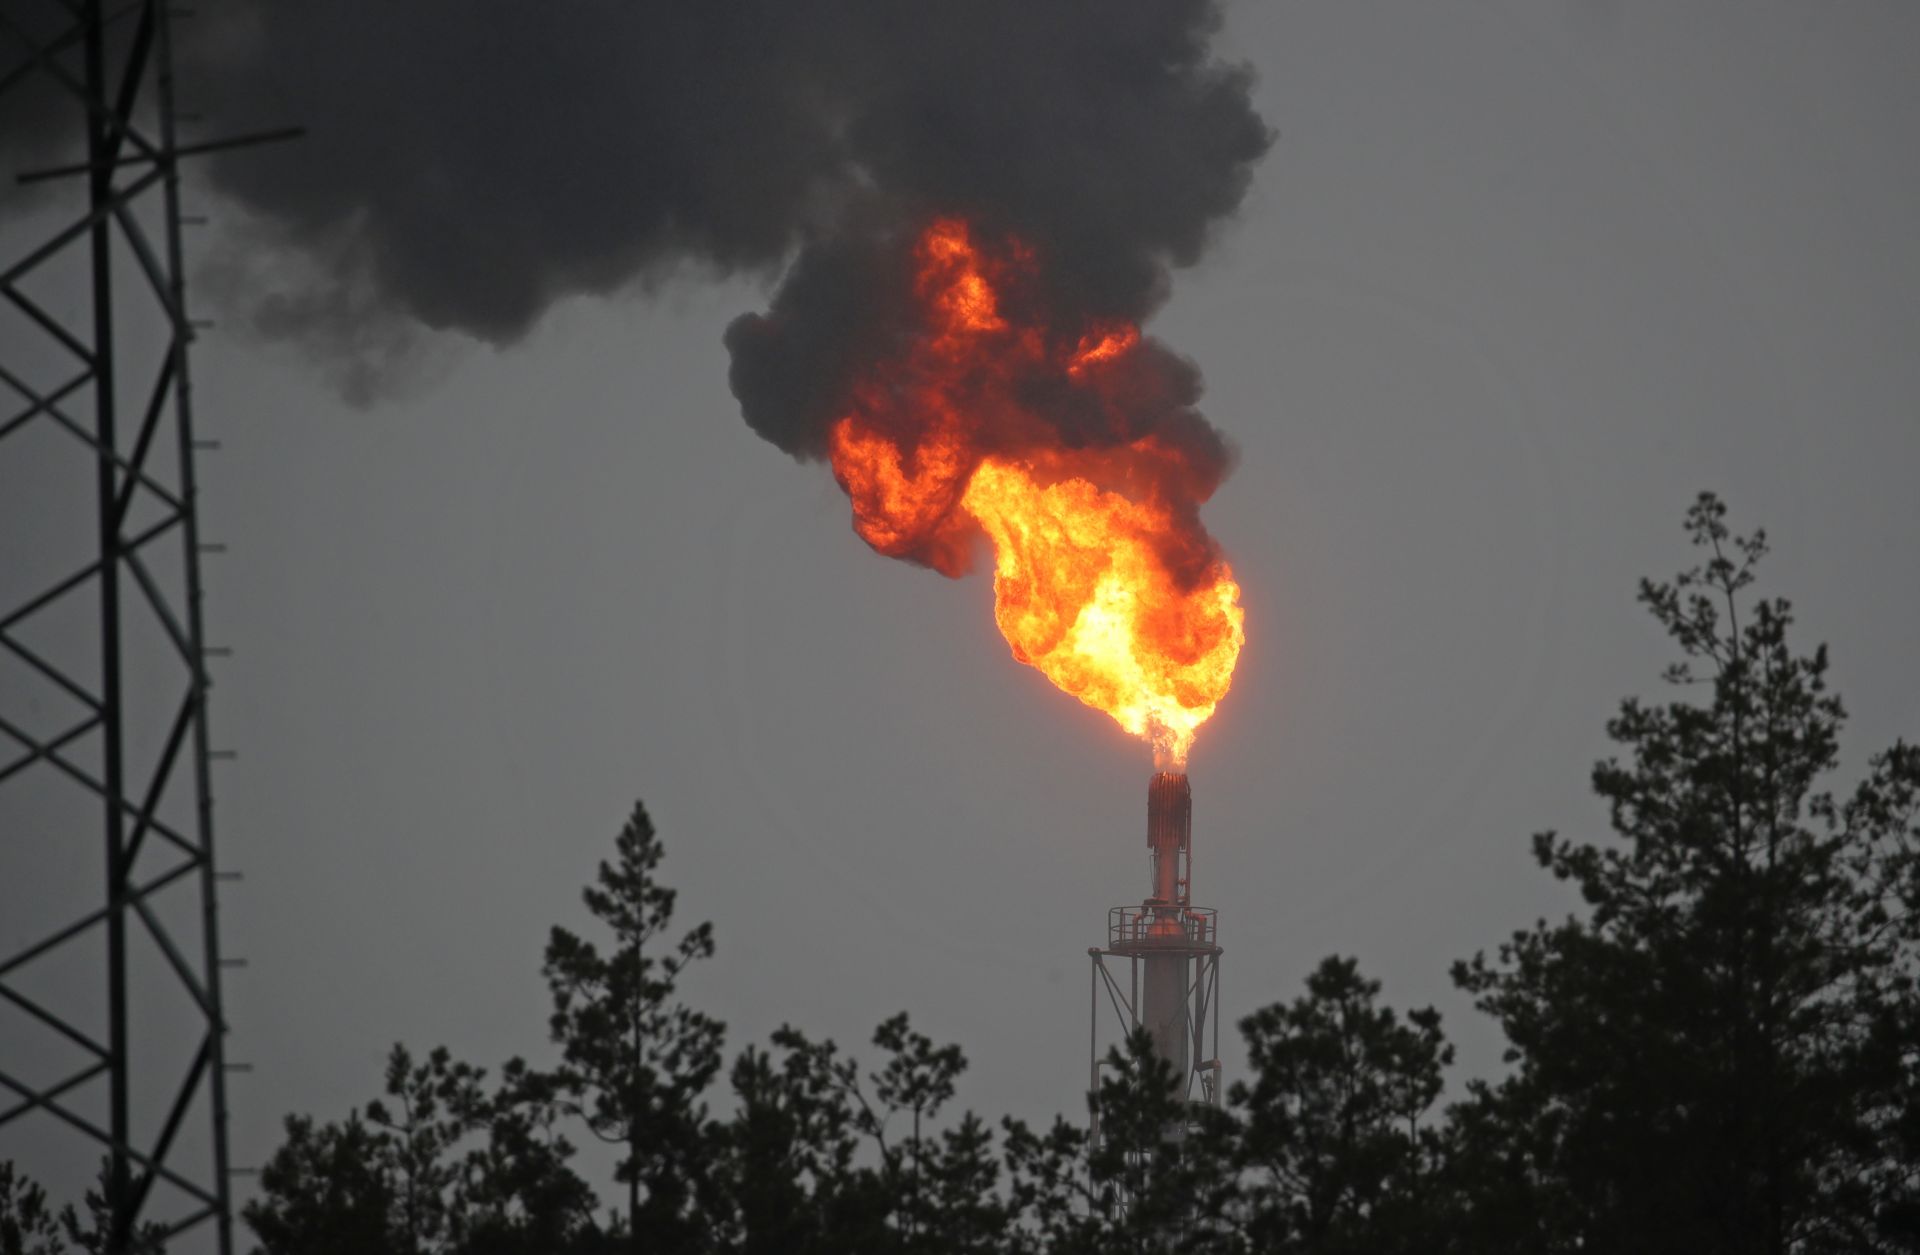 An image of a gas flare at the Mozyr Oil Refinery in Belarus on Jan. 4, 2020. Russia recently resumed its oil deliveries to Belarus after a pricing dispute prompted Moscow to halt its supplies at the beginning of the year.